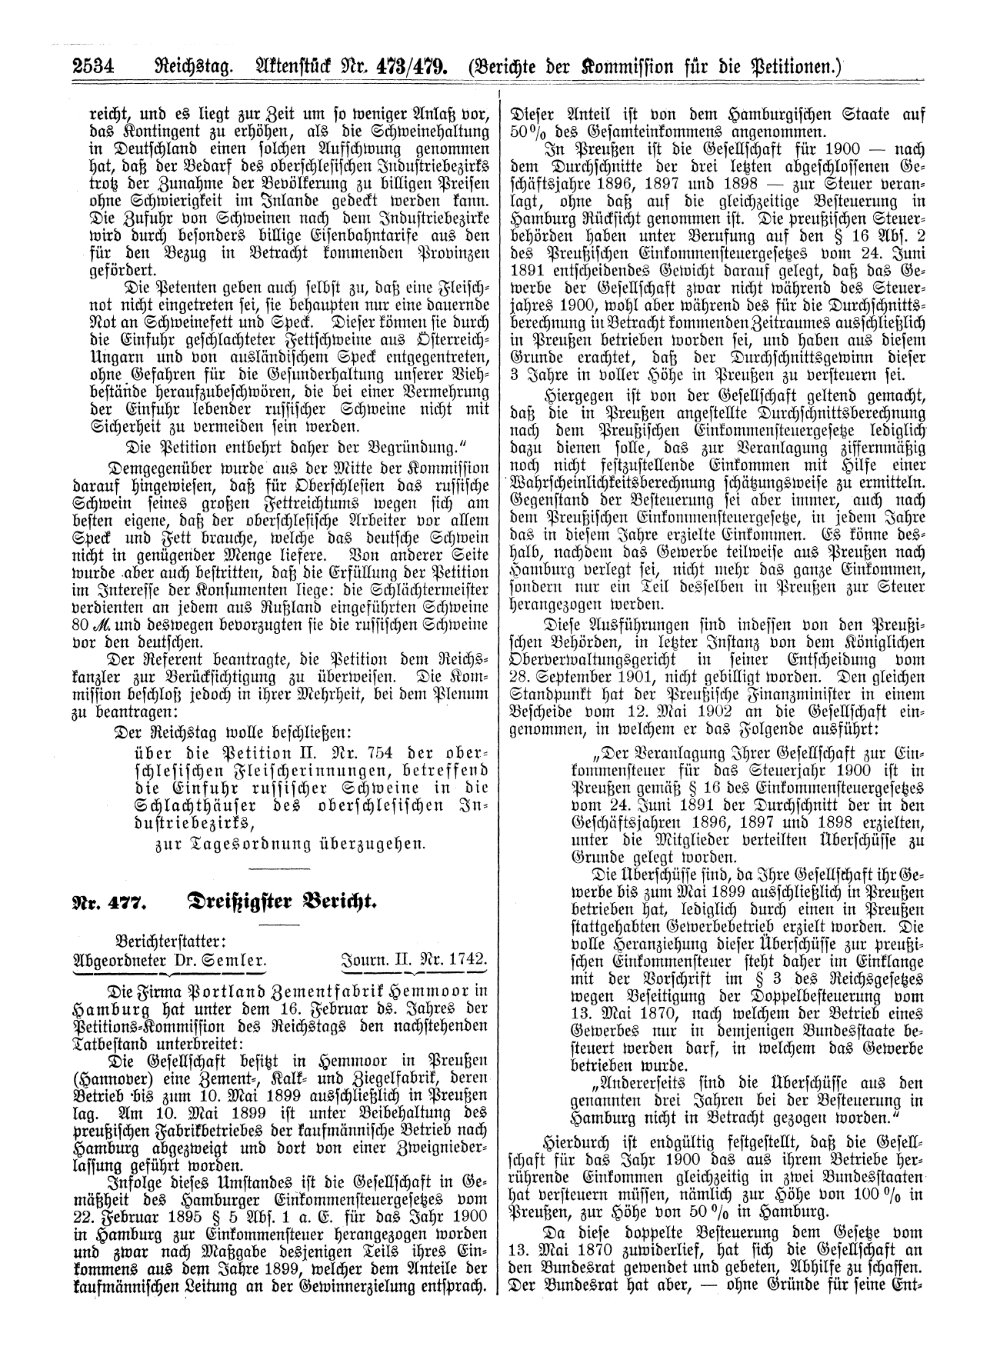 Scan of page 2534